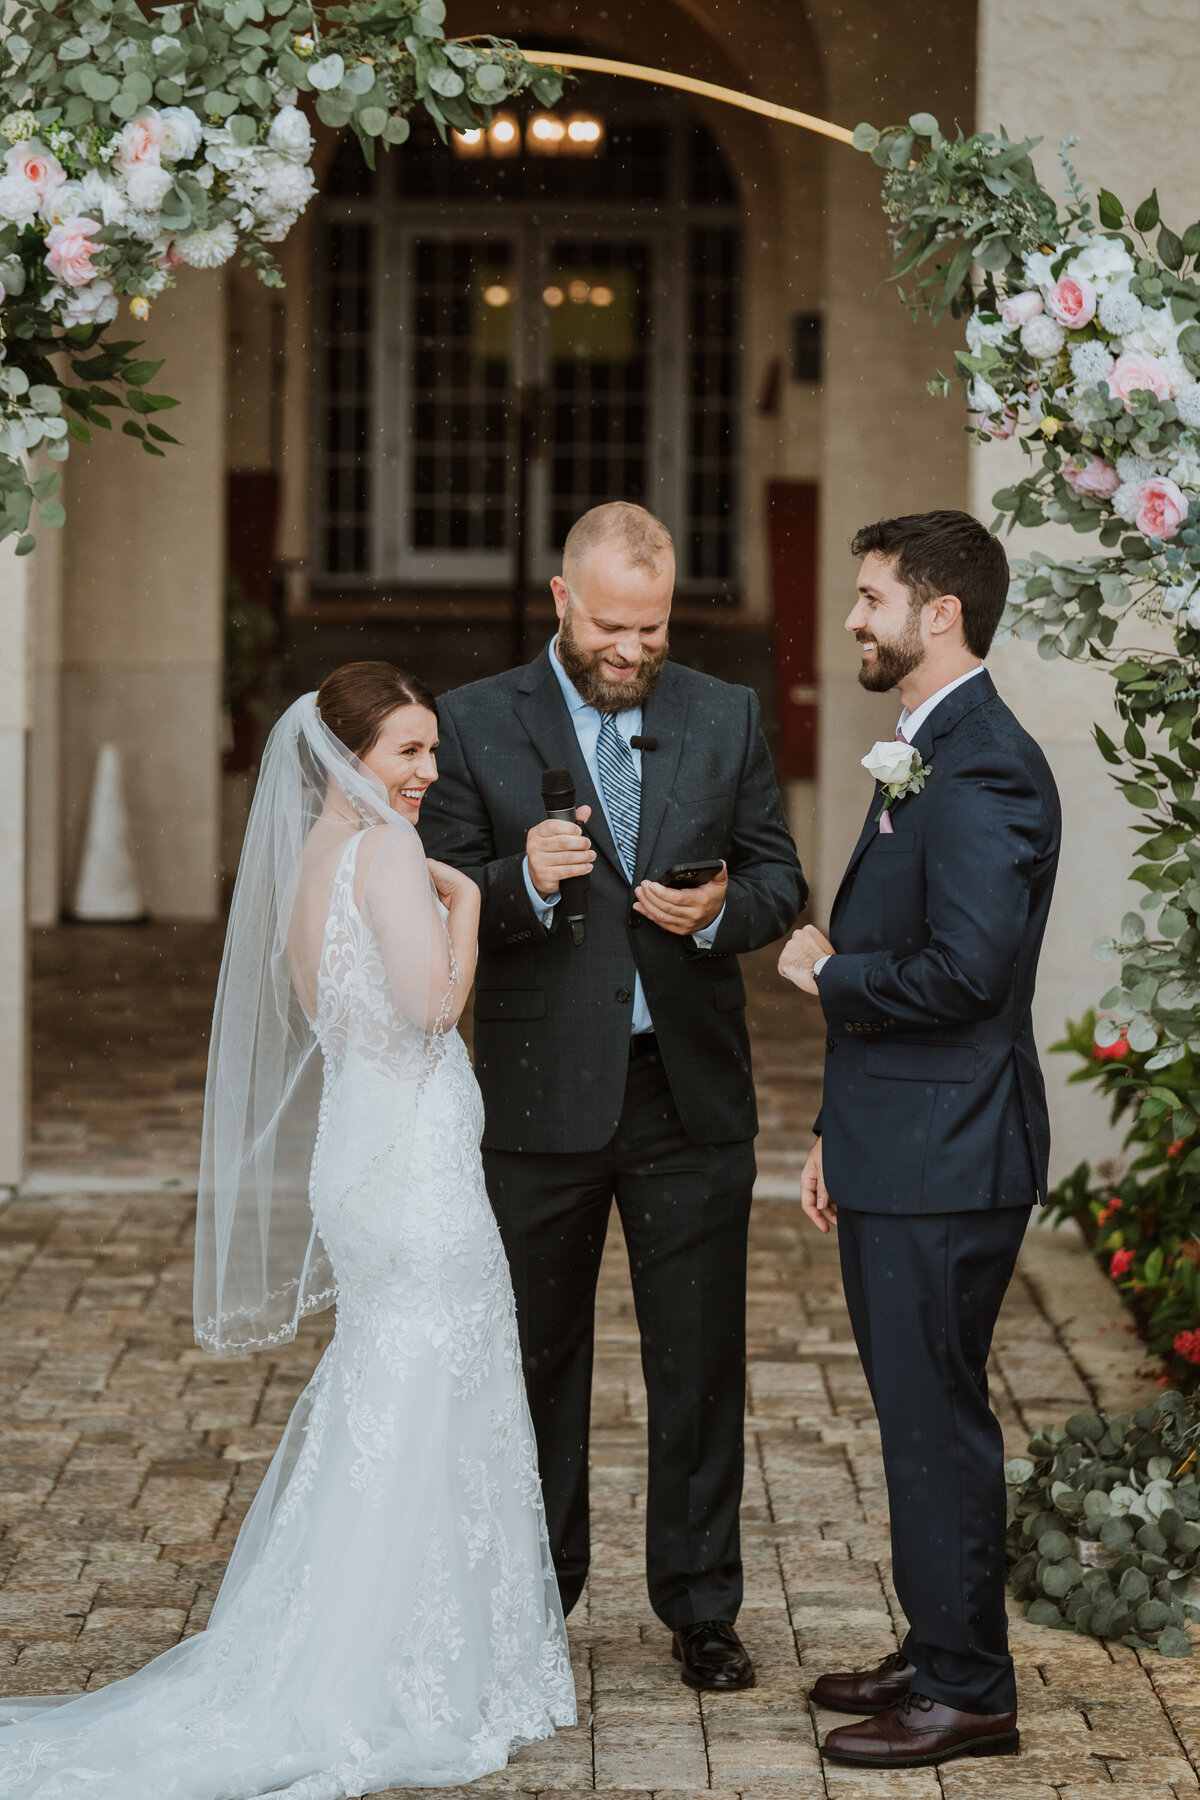 wedding ceremony vows in the rain at the fenway hotel in dunedin florida